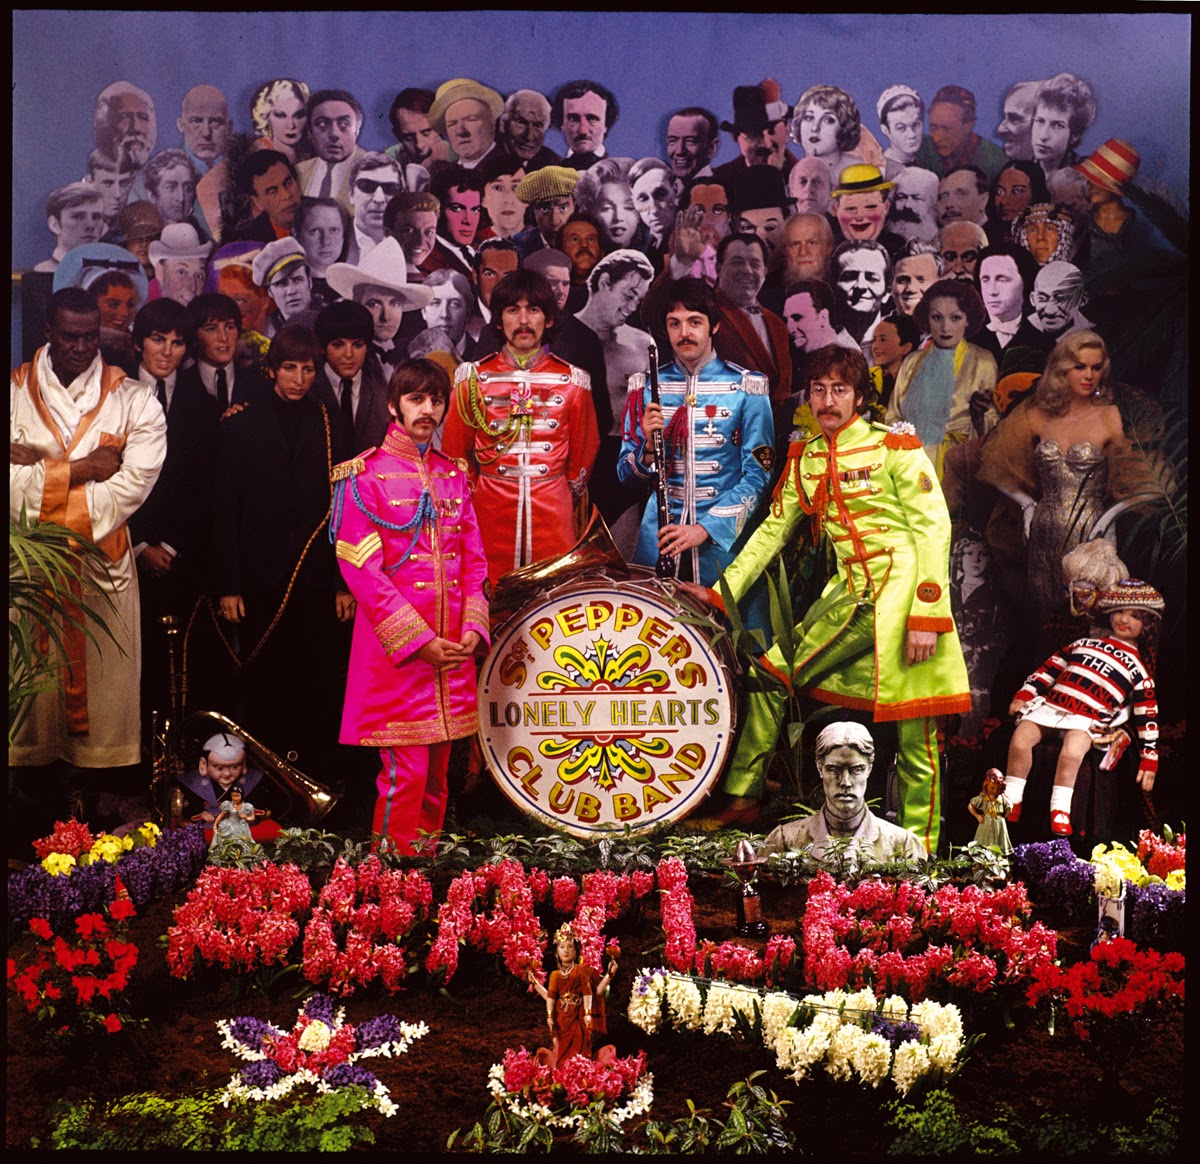 Sgt. Pepper's Lonely Hearts Club Band - Wikipedia